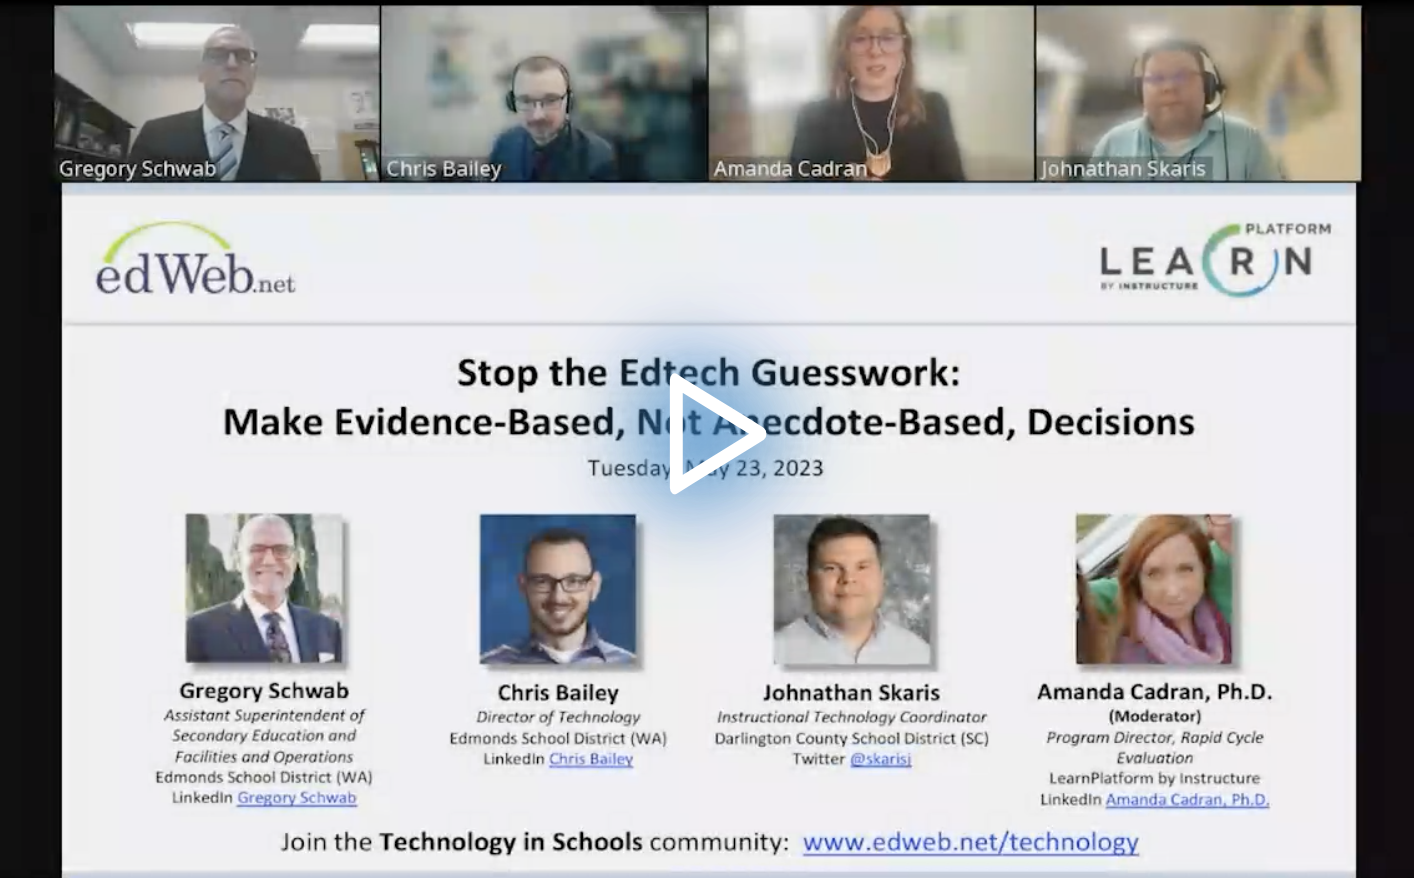 Stop the Edtech Guesswork: Make Evidence-Based, Not Anecdote-Based, Decisions edLeader Panel recording screenshot